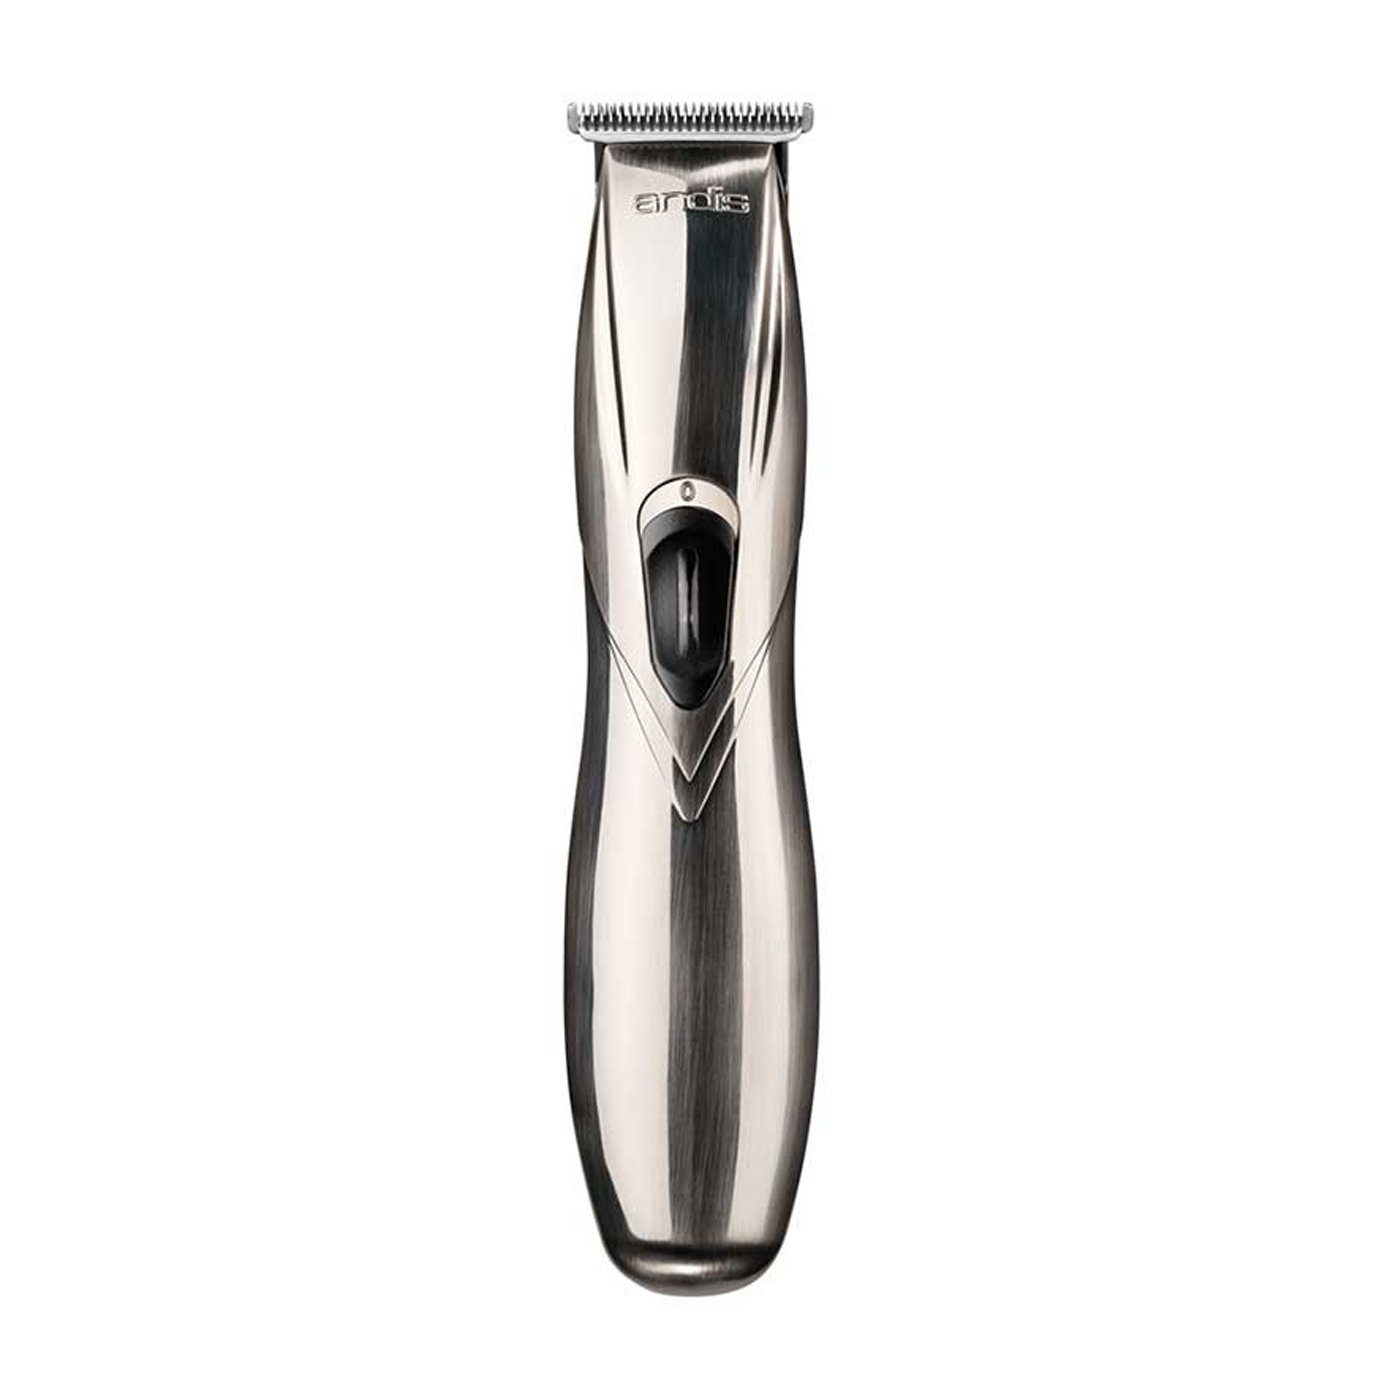 Andis Slimline Pro Lithium Cordless Rechargeable Trimmer Silver - Ultimate Hair and Beauty